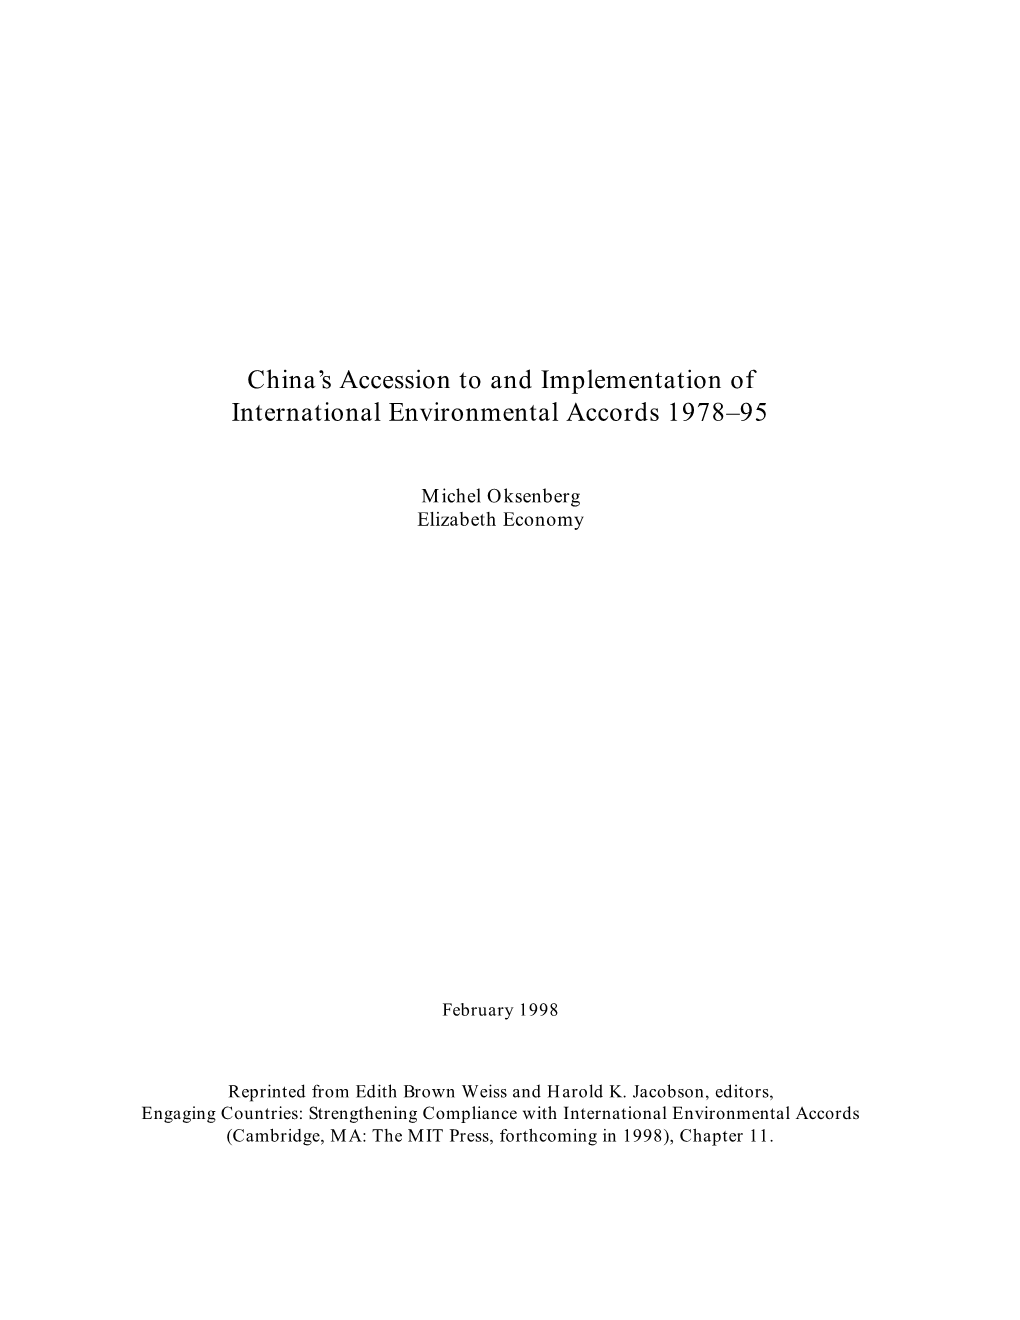 China's Accession to and Implementation of International Environmental Accords 1978–95